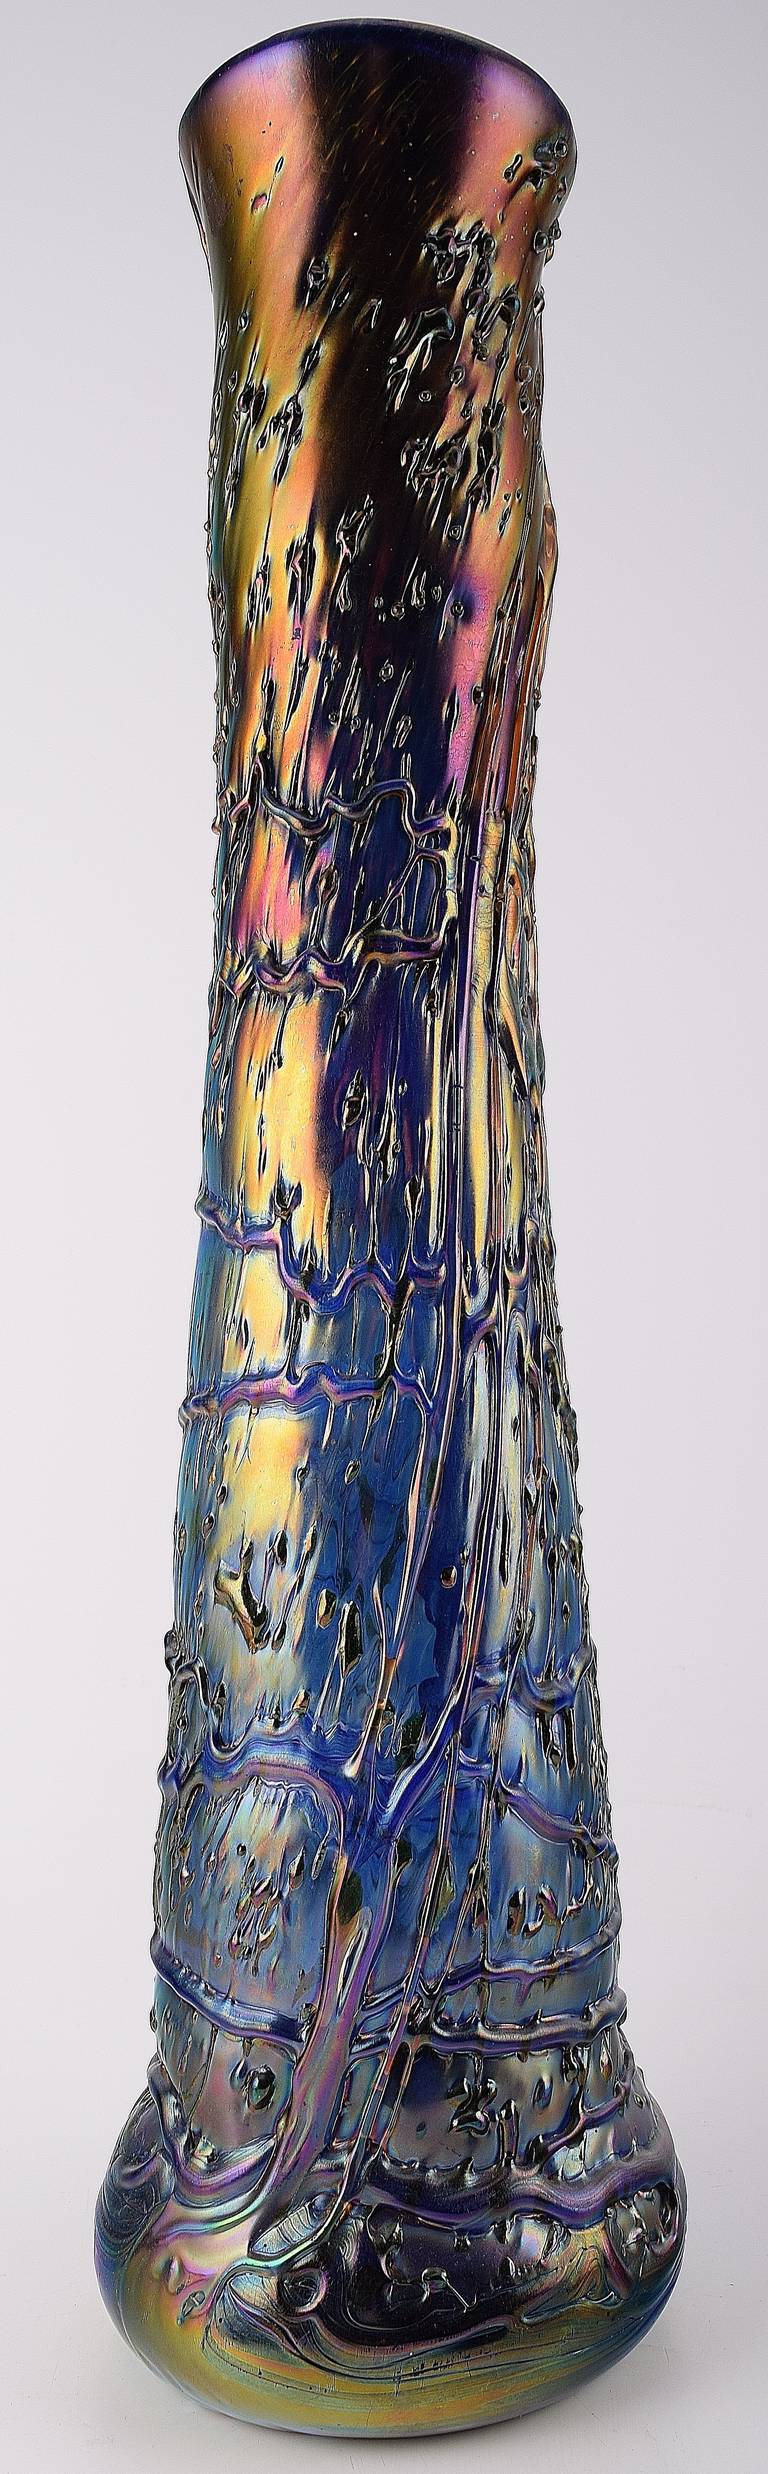 Large Art Nouveau Loetz style art glass vase. Rainbow colors with shades of purple and golden green. Measures: H. 49 cm. In good condition.